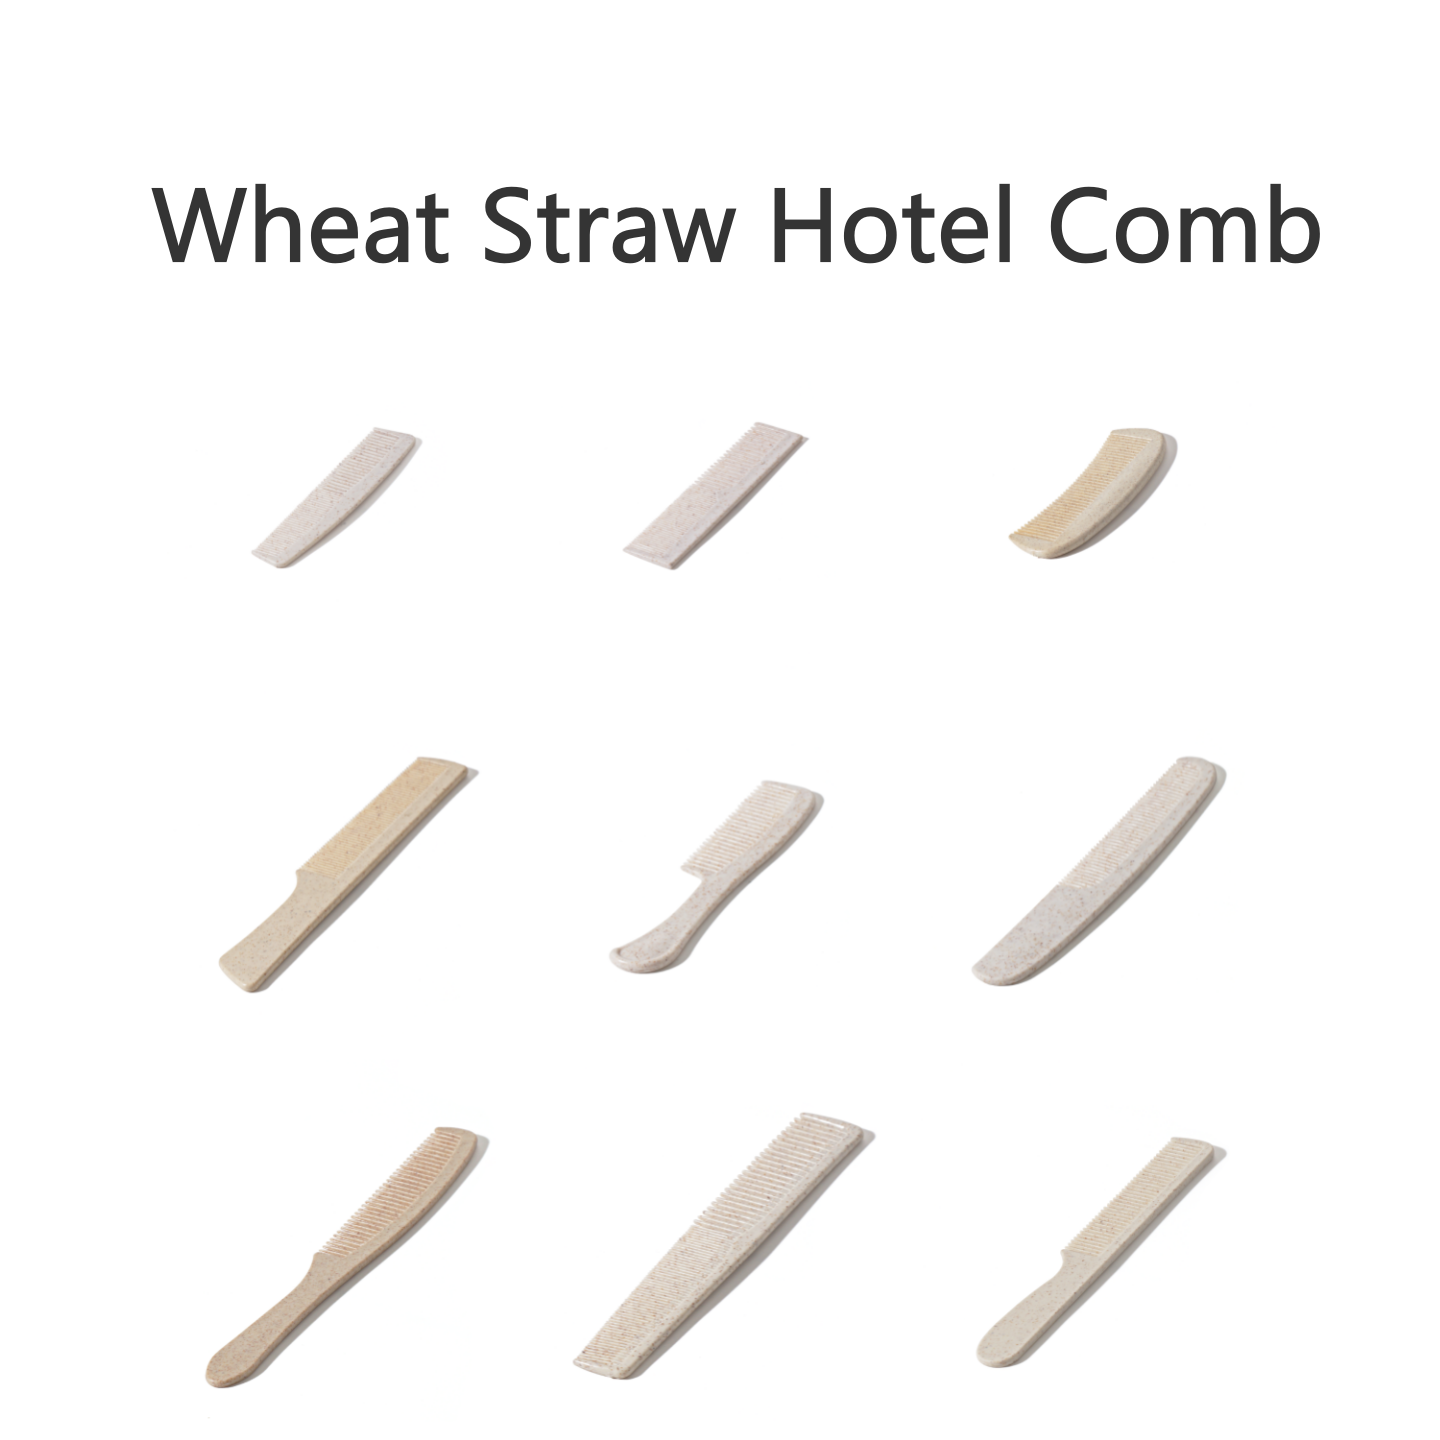 Custom Personalized Eco Friendly Wheat Straw Hotel Comb factory